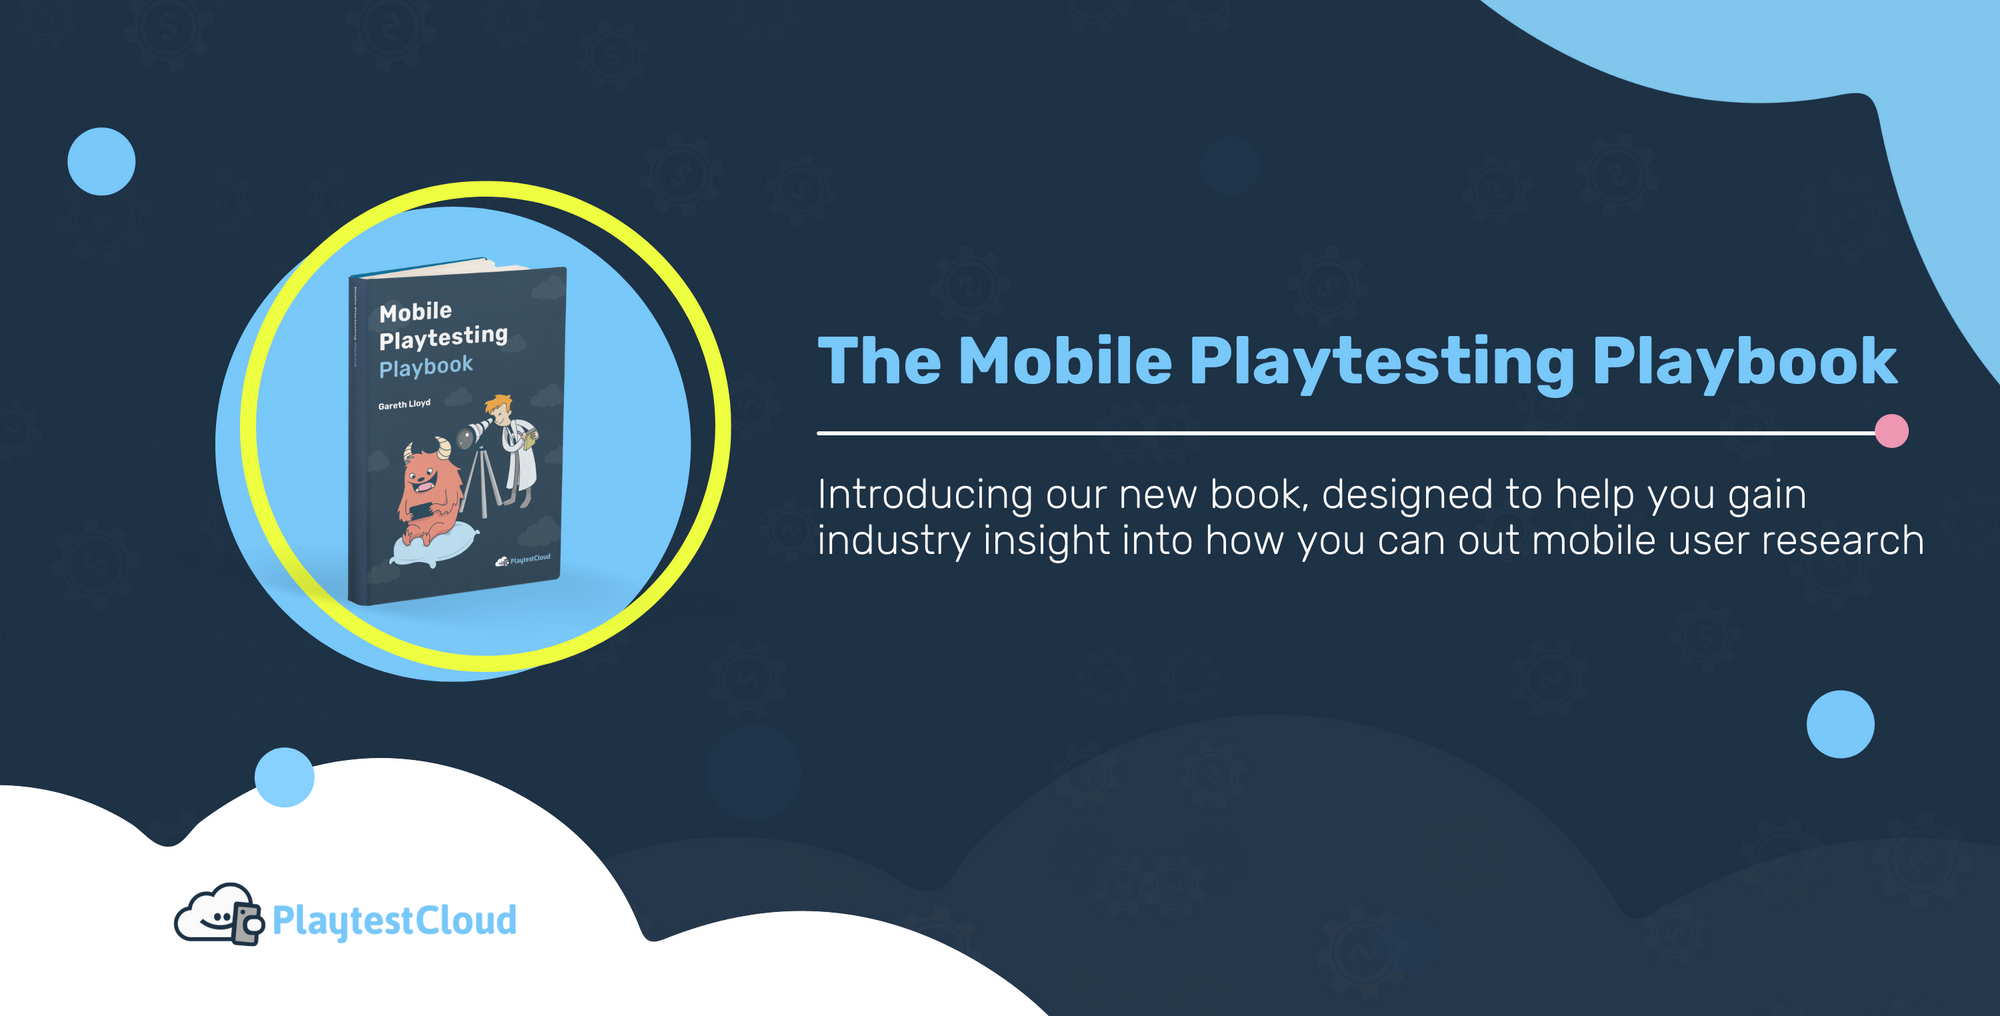 Introducing the Mobile Playtesting Playbook